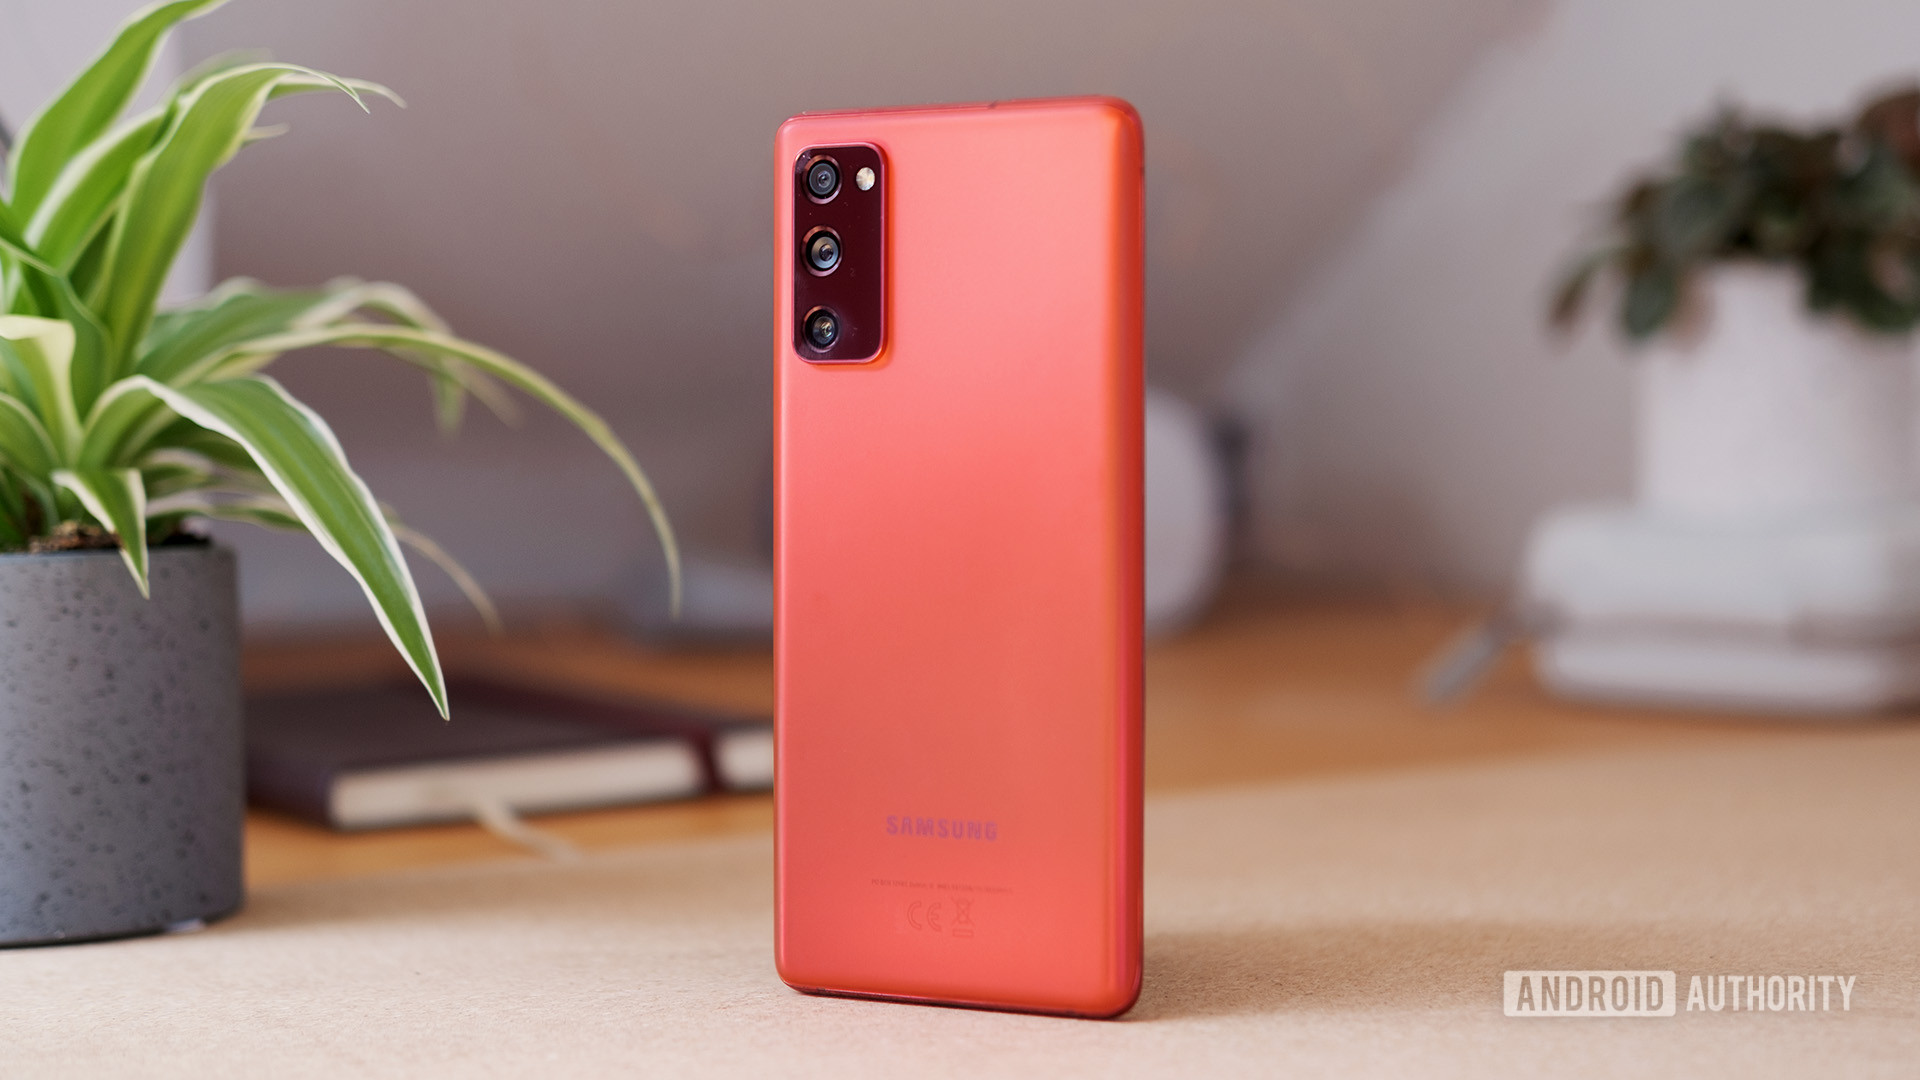 Samsung Galaxy S20 FE red colorway